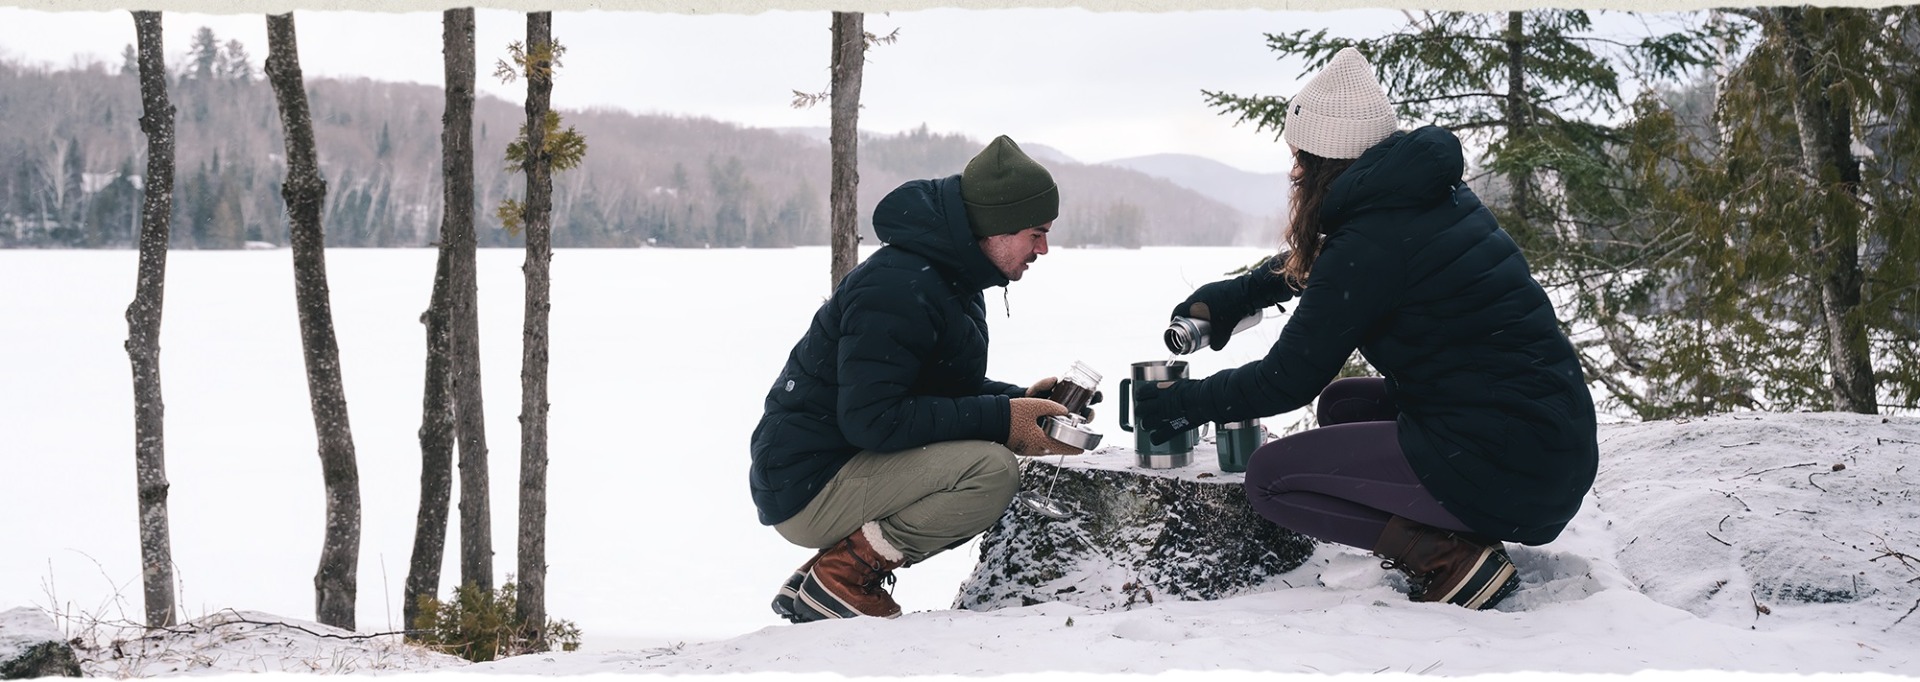 Two people pouring coffee  in a wintery landscape.